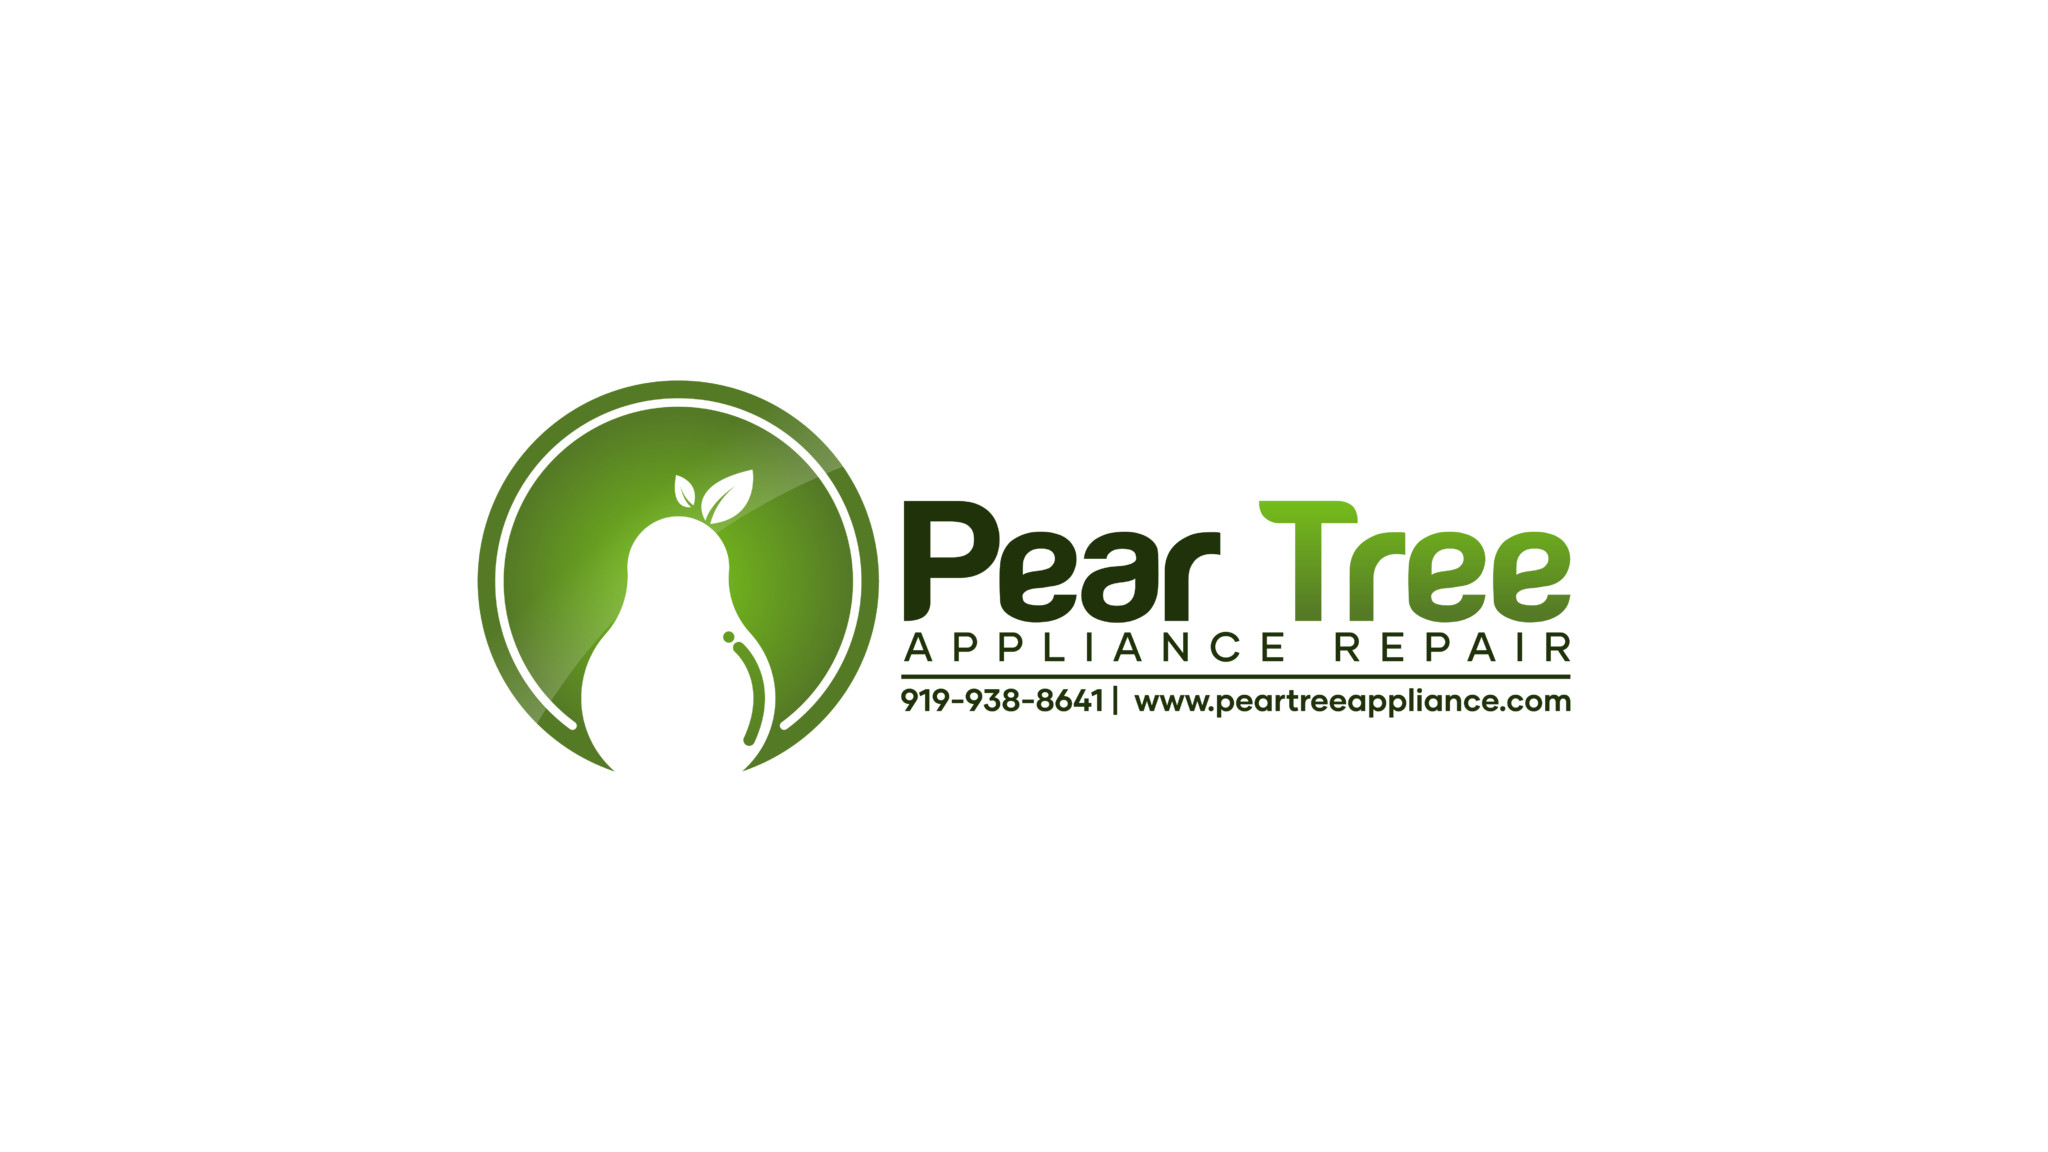 Pear Tree Appliance Repair - We are seeing a rise in calls for